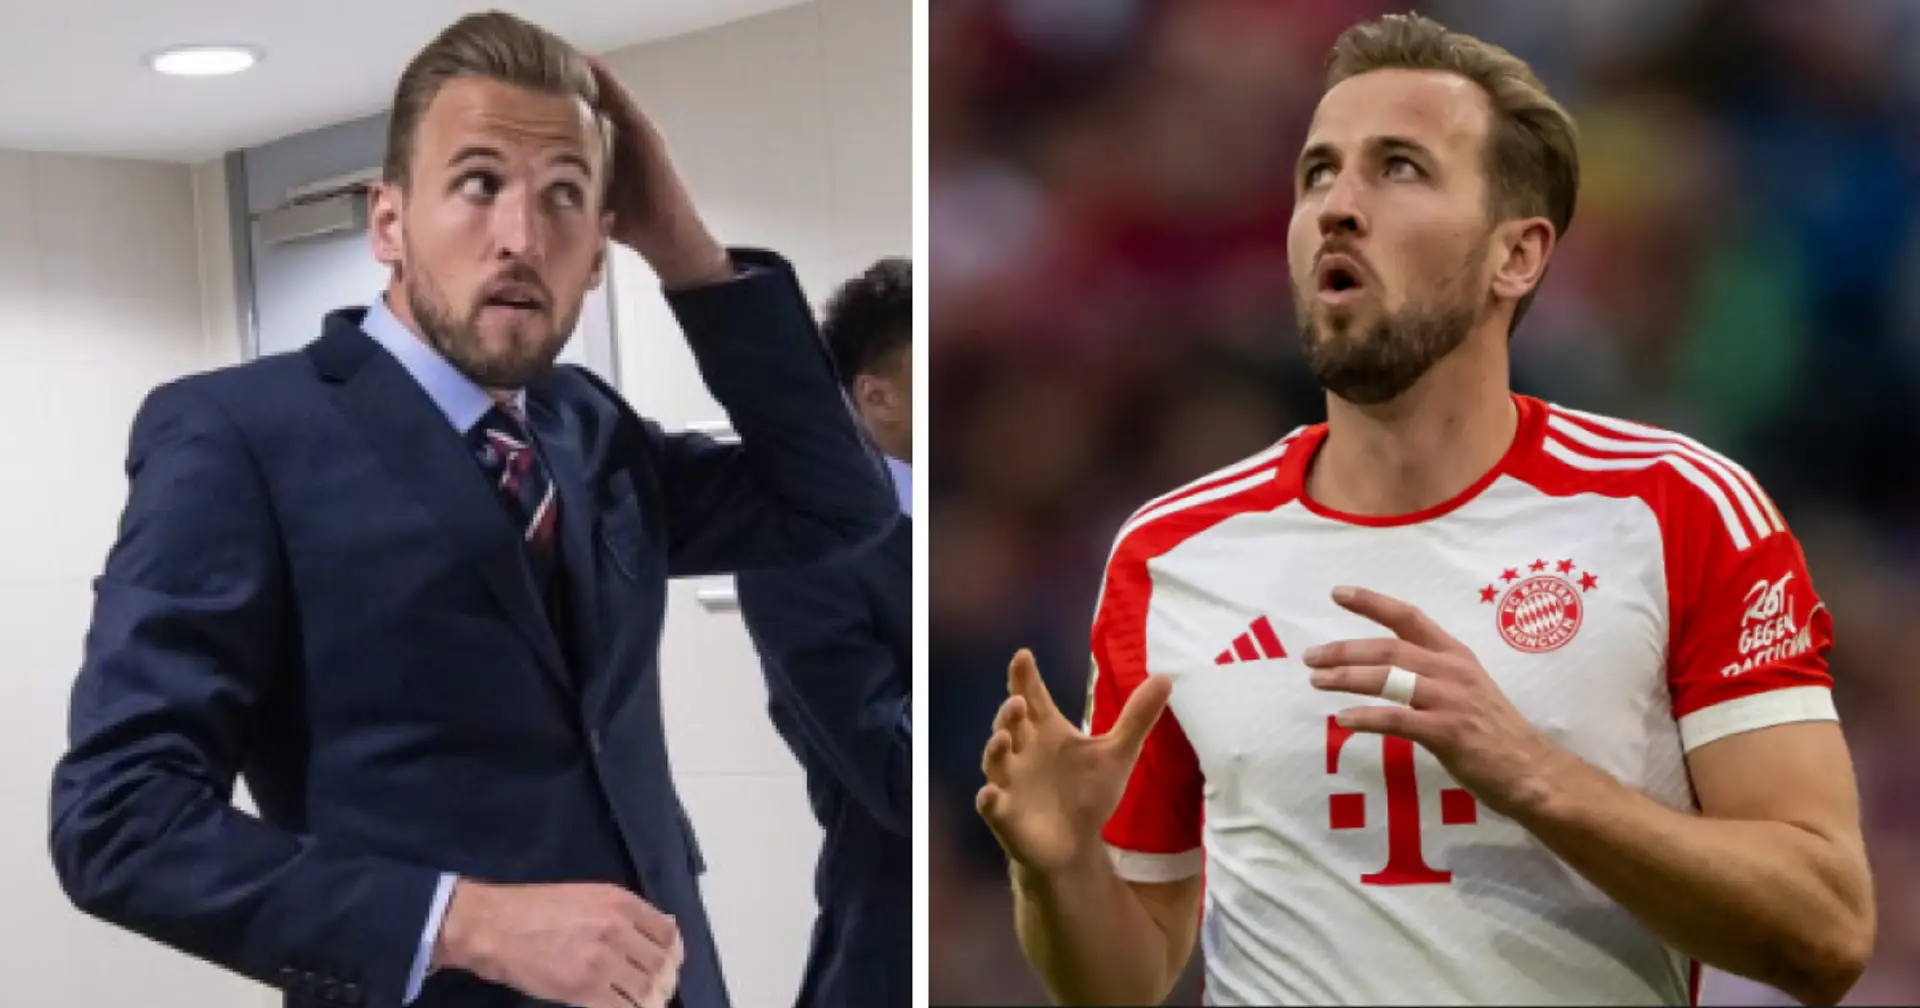 Harry Kane has a profitable side business that earns him millions